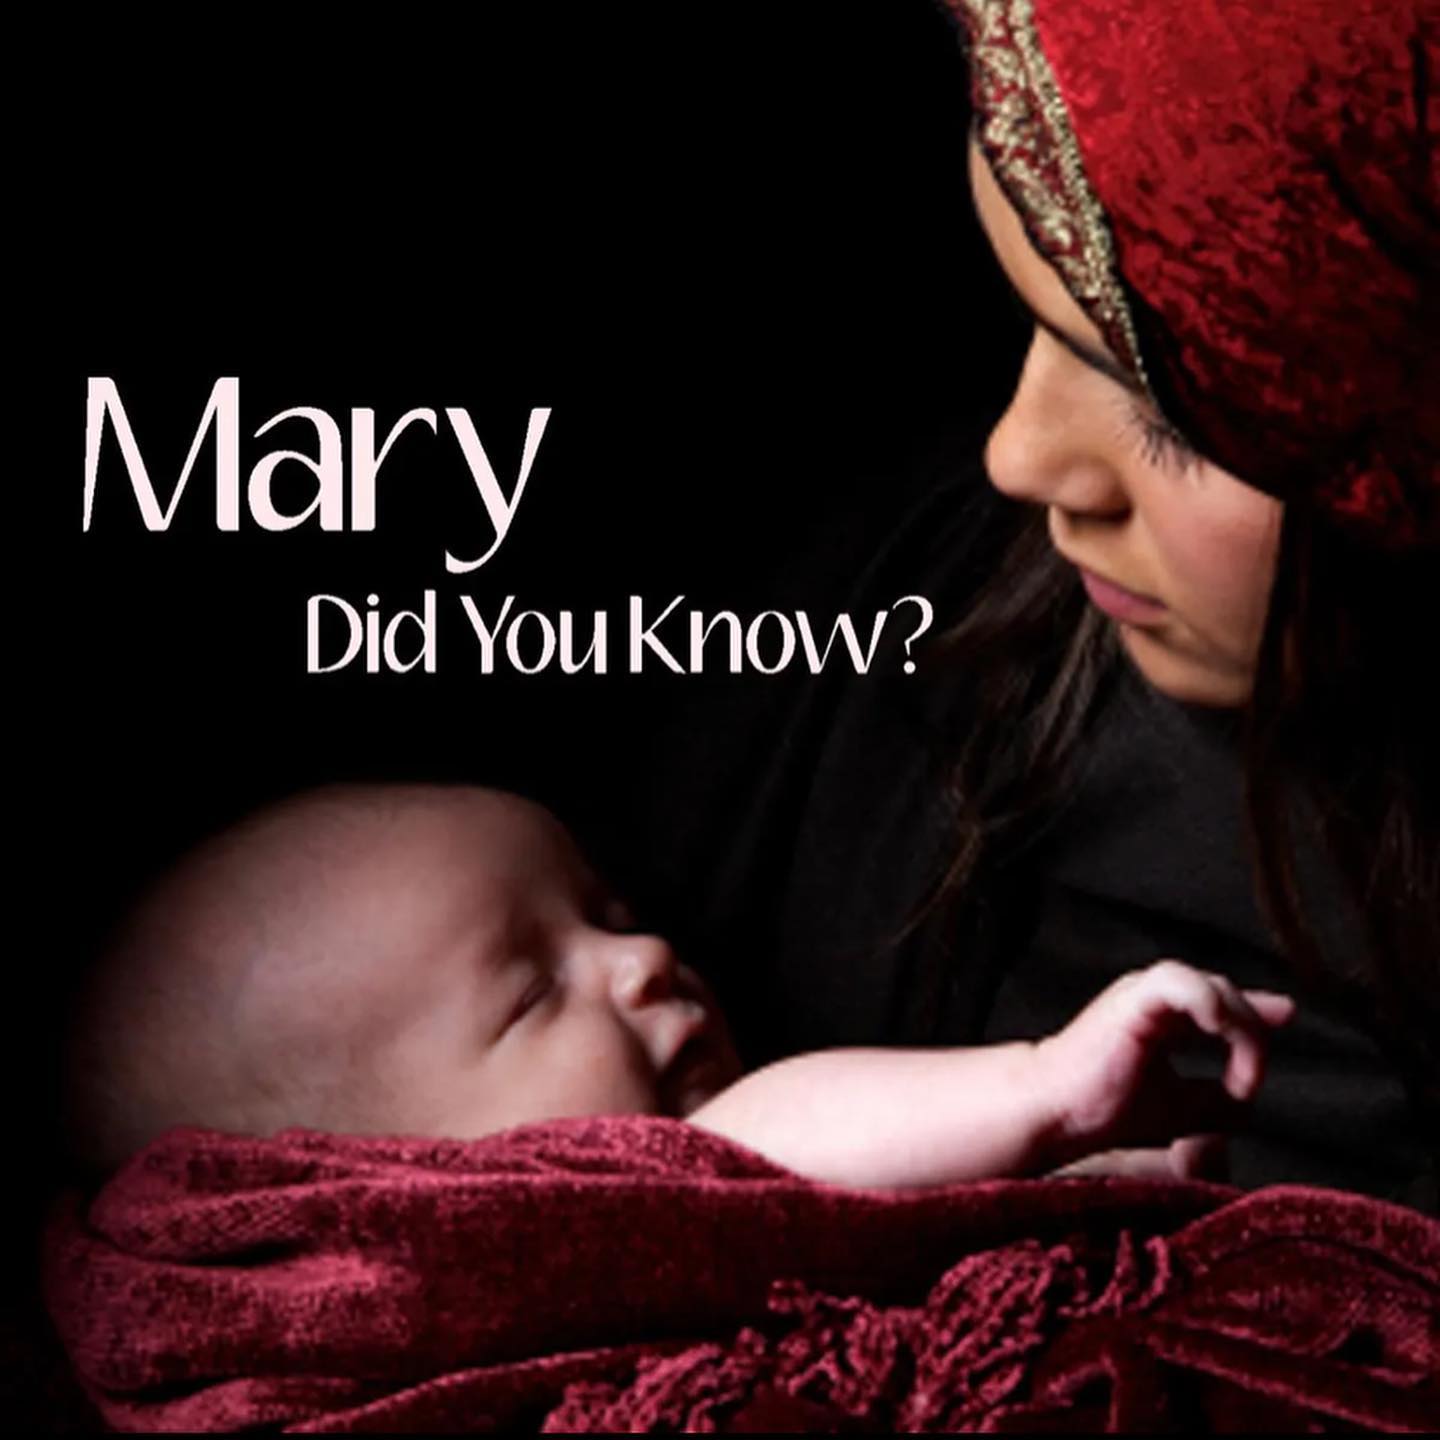 What to Expect When You’re Expecting… Did Mary know what she was getting into? What happens when we’re undoubtedly called by God for His purpose? If you’re Mary, it’s risky, terrifying and exciting. Join us Sunday 10AM @fallbrookvineyardchurch as we learn about Mary, the mother of Jesus with Steph Baxter @stephabaxter #marydidyouknow#breathofheaven#birthofchrist#marymotherofjesus#christmasstory#growinginfaith#faithinaction#holiness#aliveinchrist#revival#repentance#wordofgod#worship#prayer #praise#praisethelord#community #support #love#familyofgod #outdoorchurch #organicchurch #outlawchurch #dogfriendlychurch